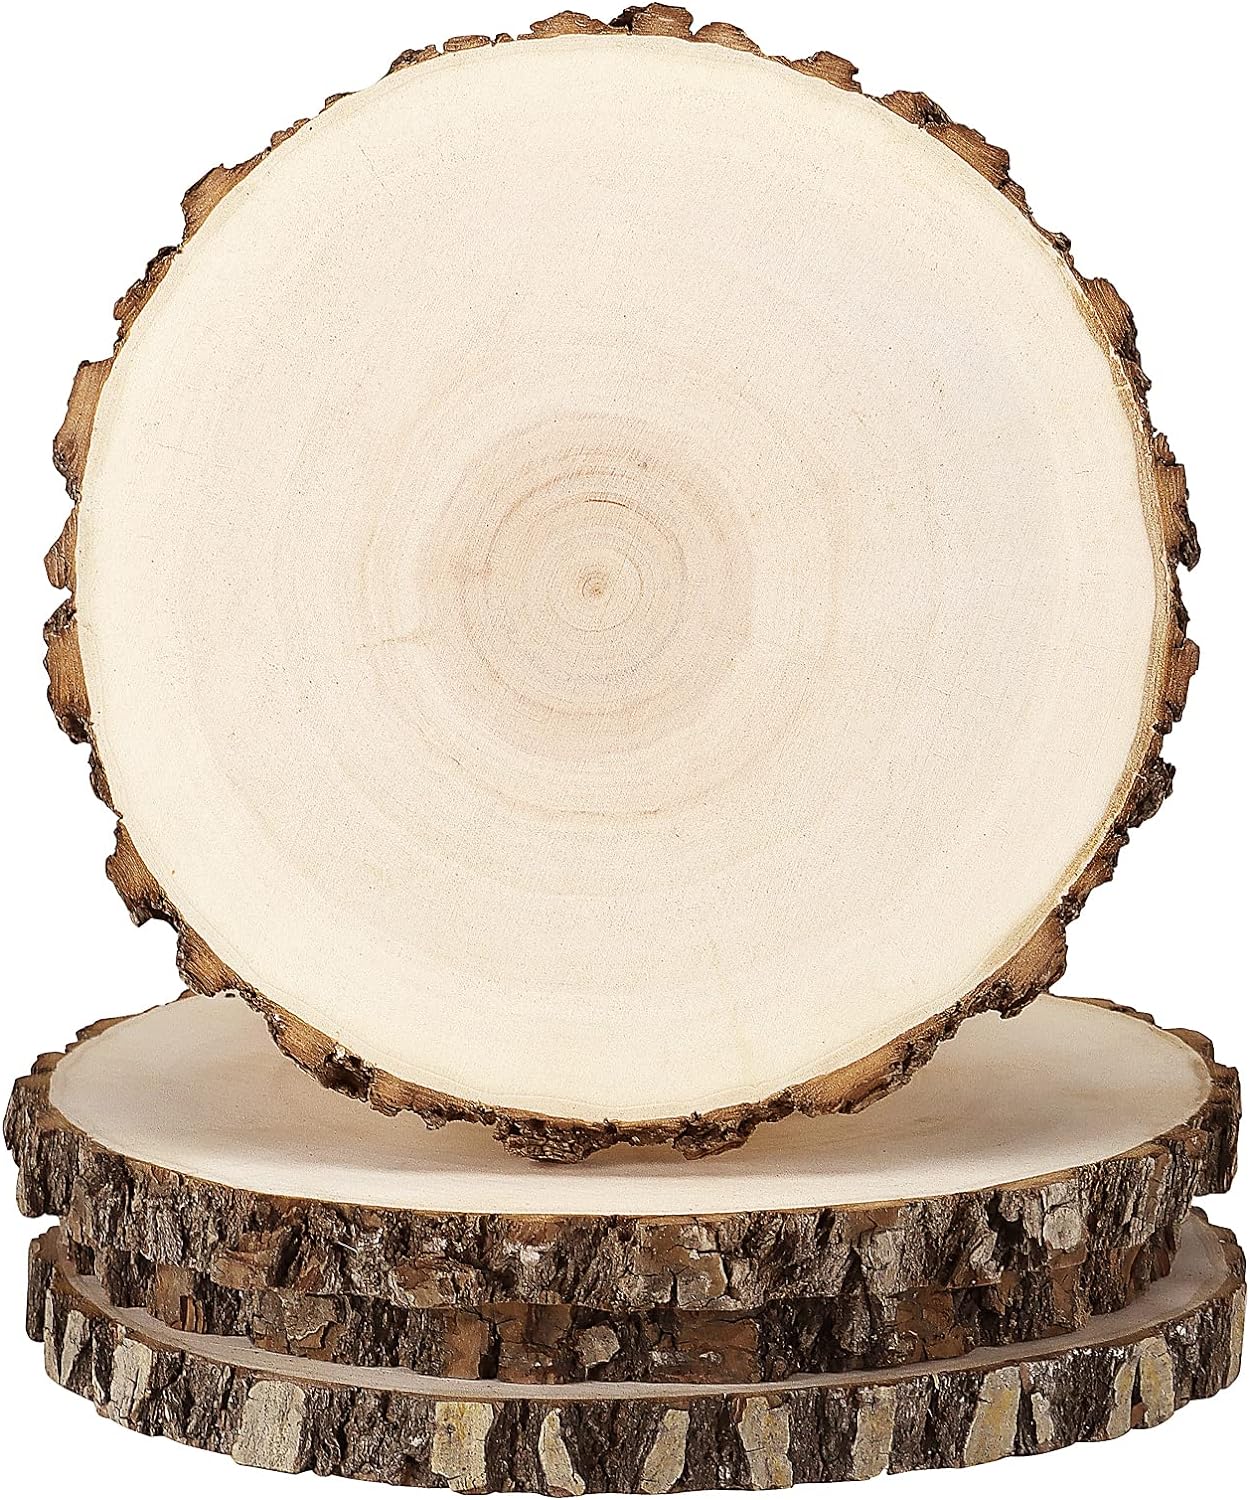 5 Pack 6-7 Inch Natural Wood Slices for Centerpieces, Wood Slice DIY  Projects